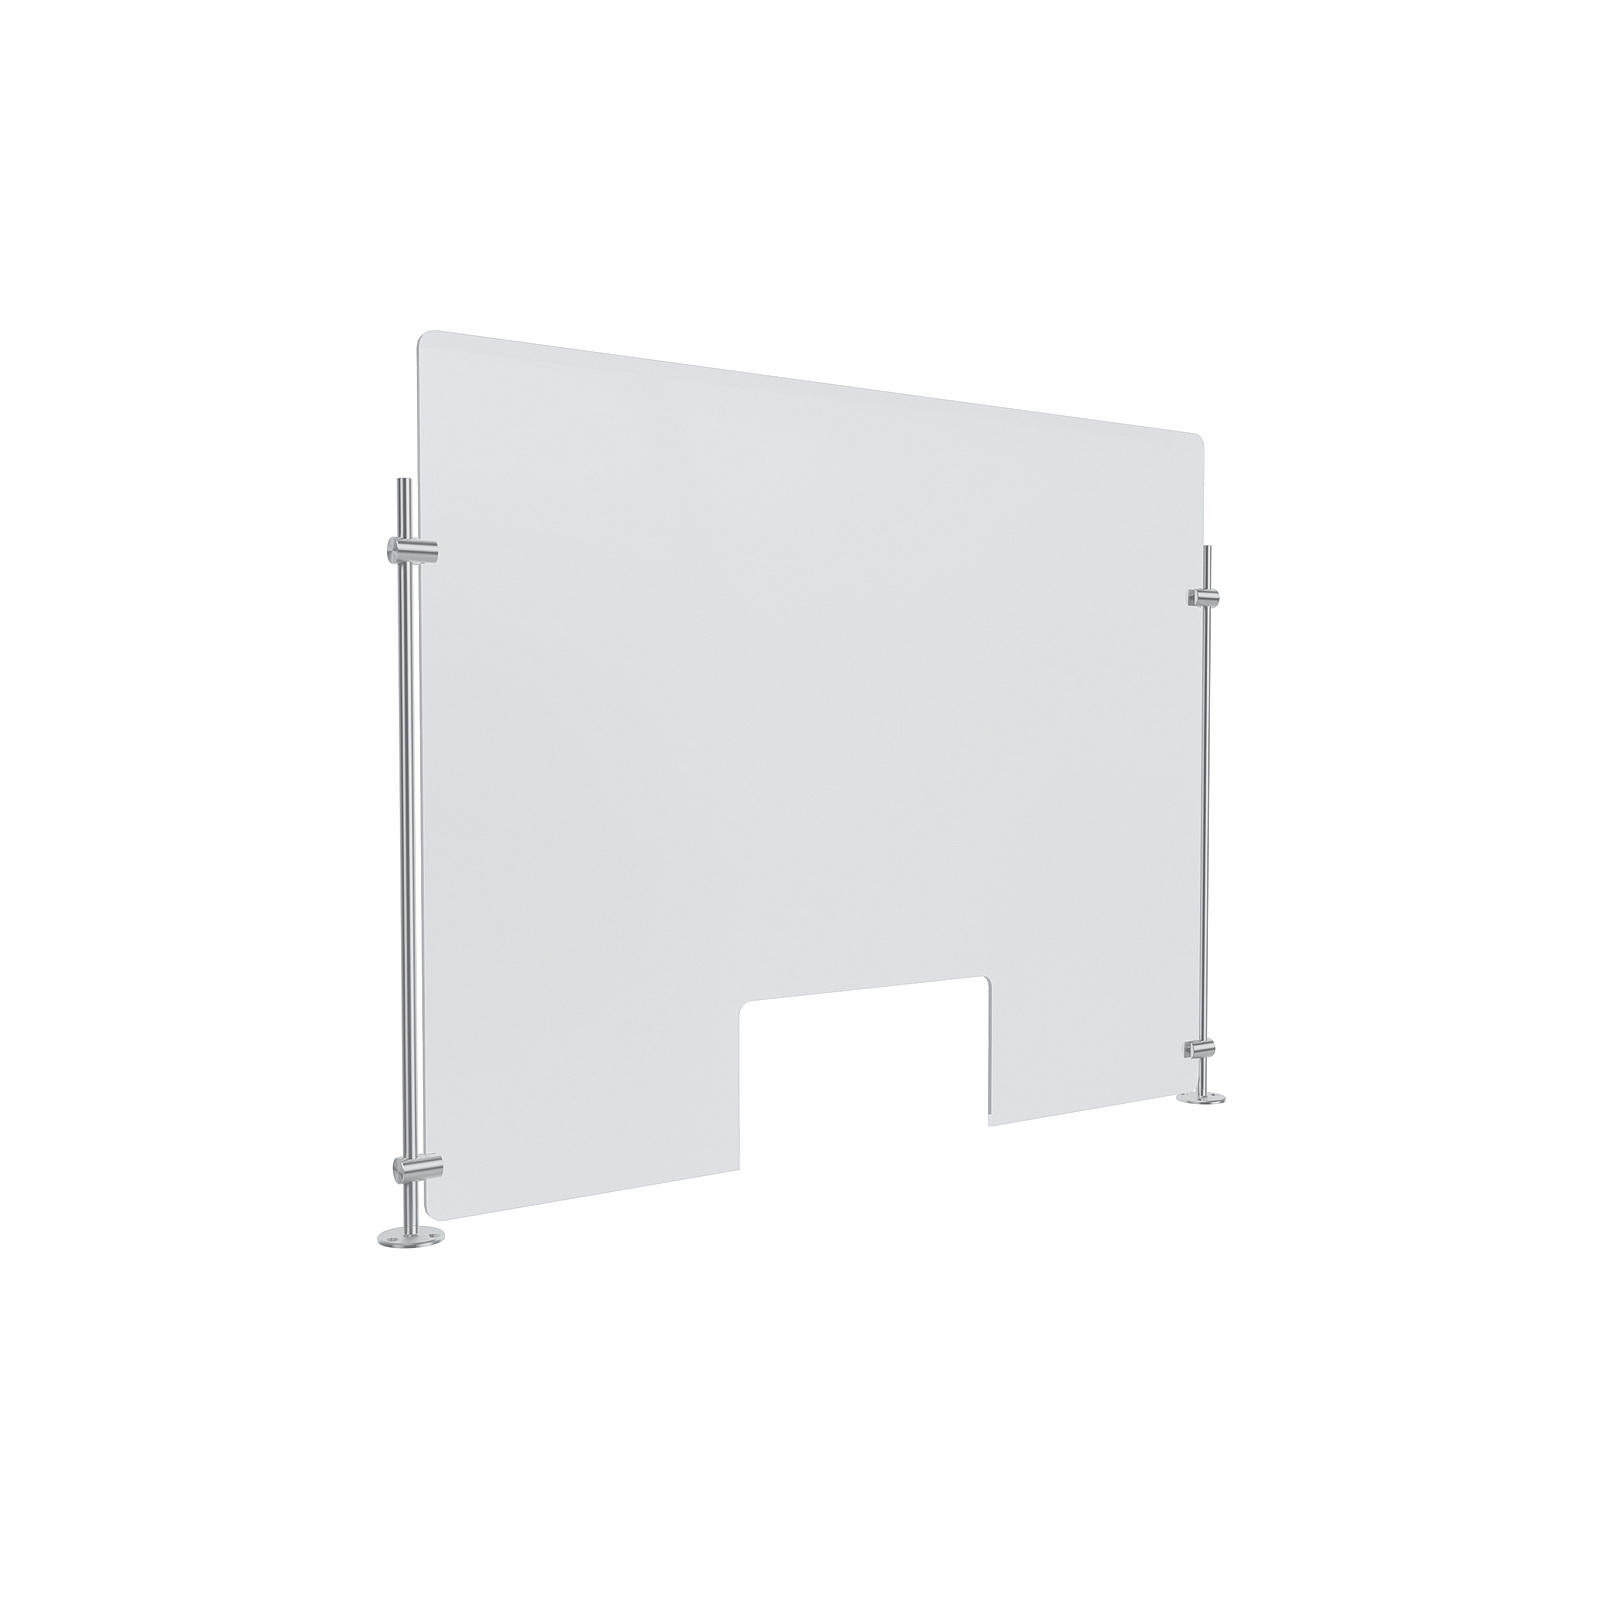 Clear Acrylic Sneeze Guard 30'' Wide x 23-1/2'' Tall (10'' x 5'' Cut Out), with (2) 20'' Tall x 3/8'' Diameter Clear Anodized Aluminum Rod on the Side..